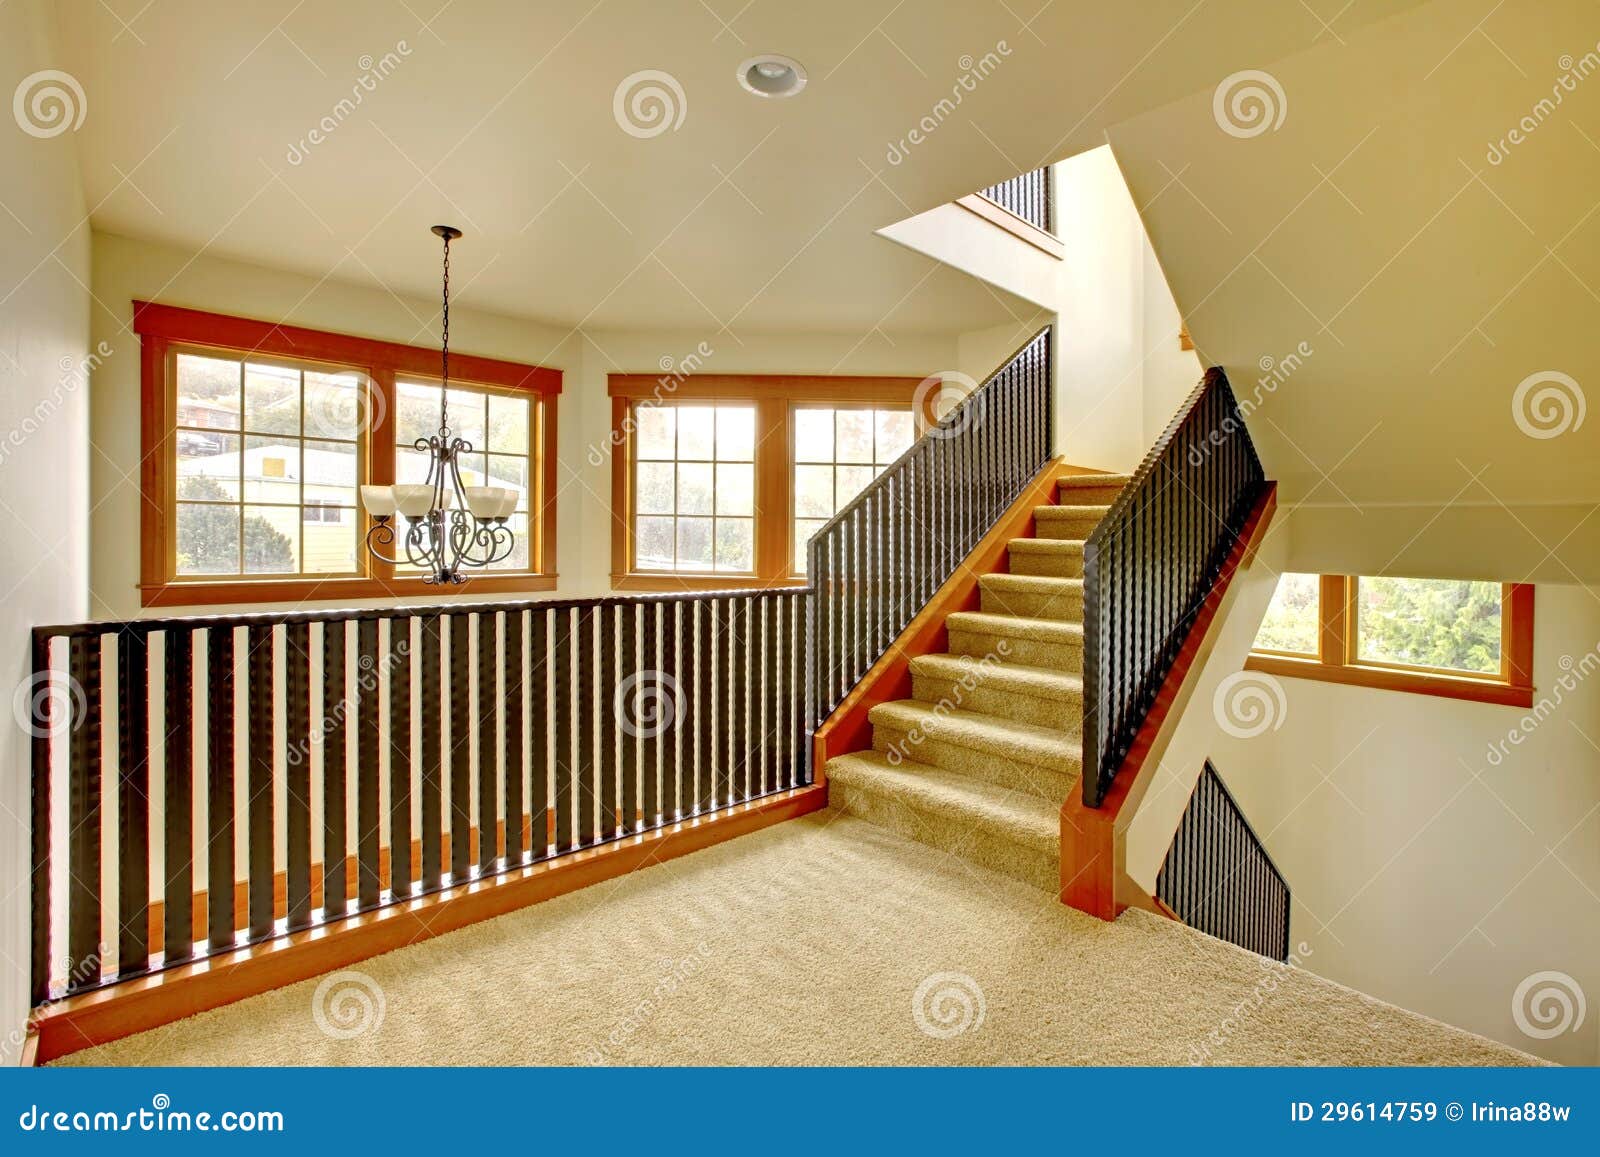 Staircase With Metal Railing New Luxury Home Interior